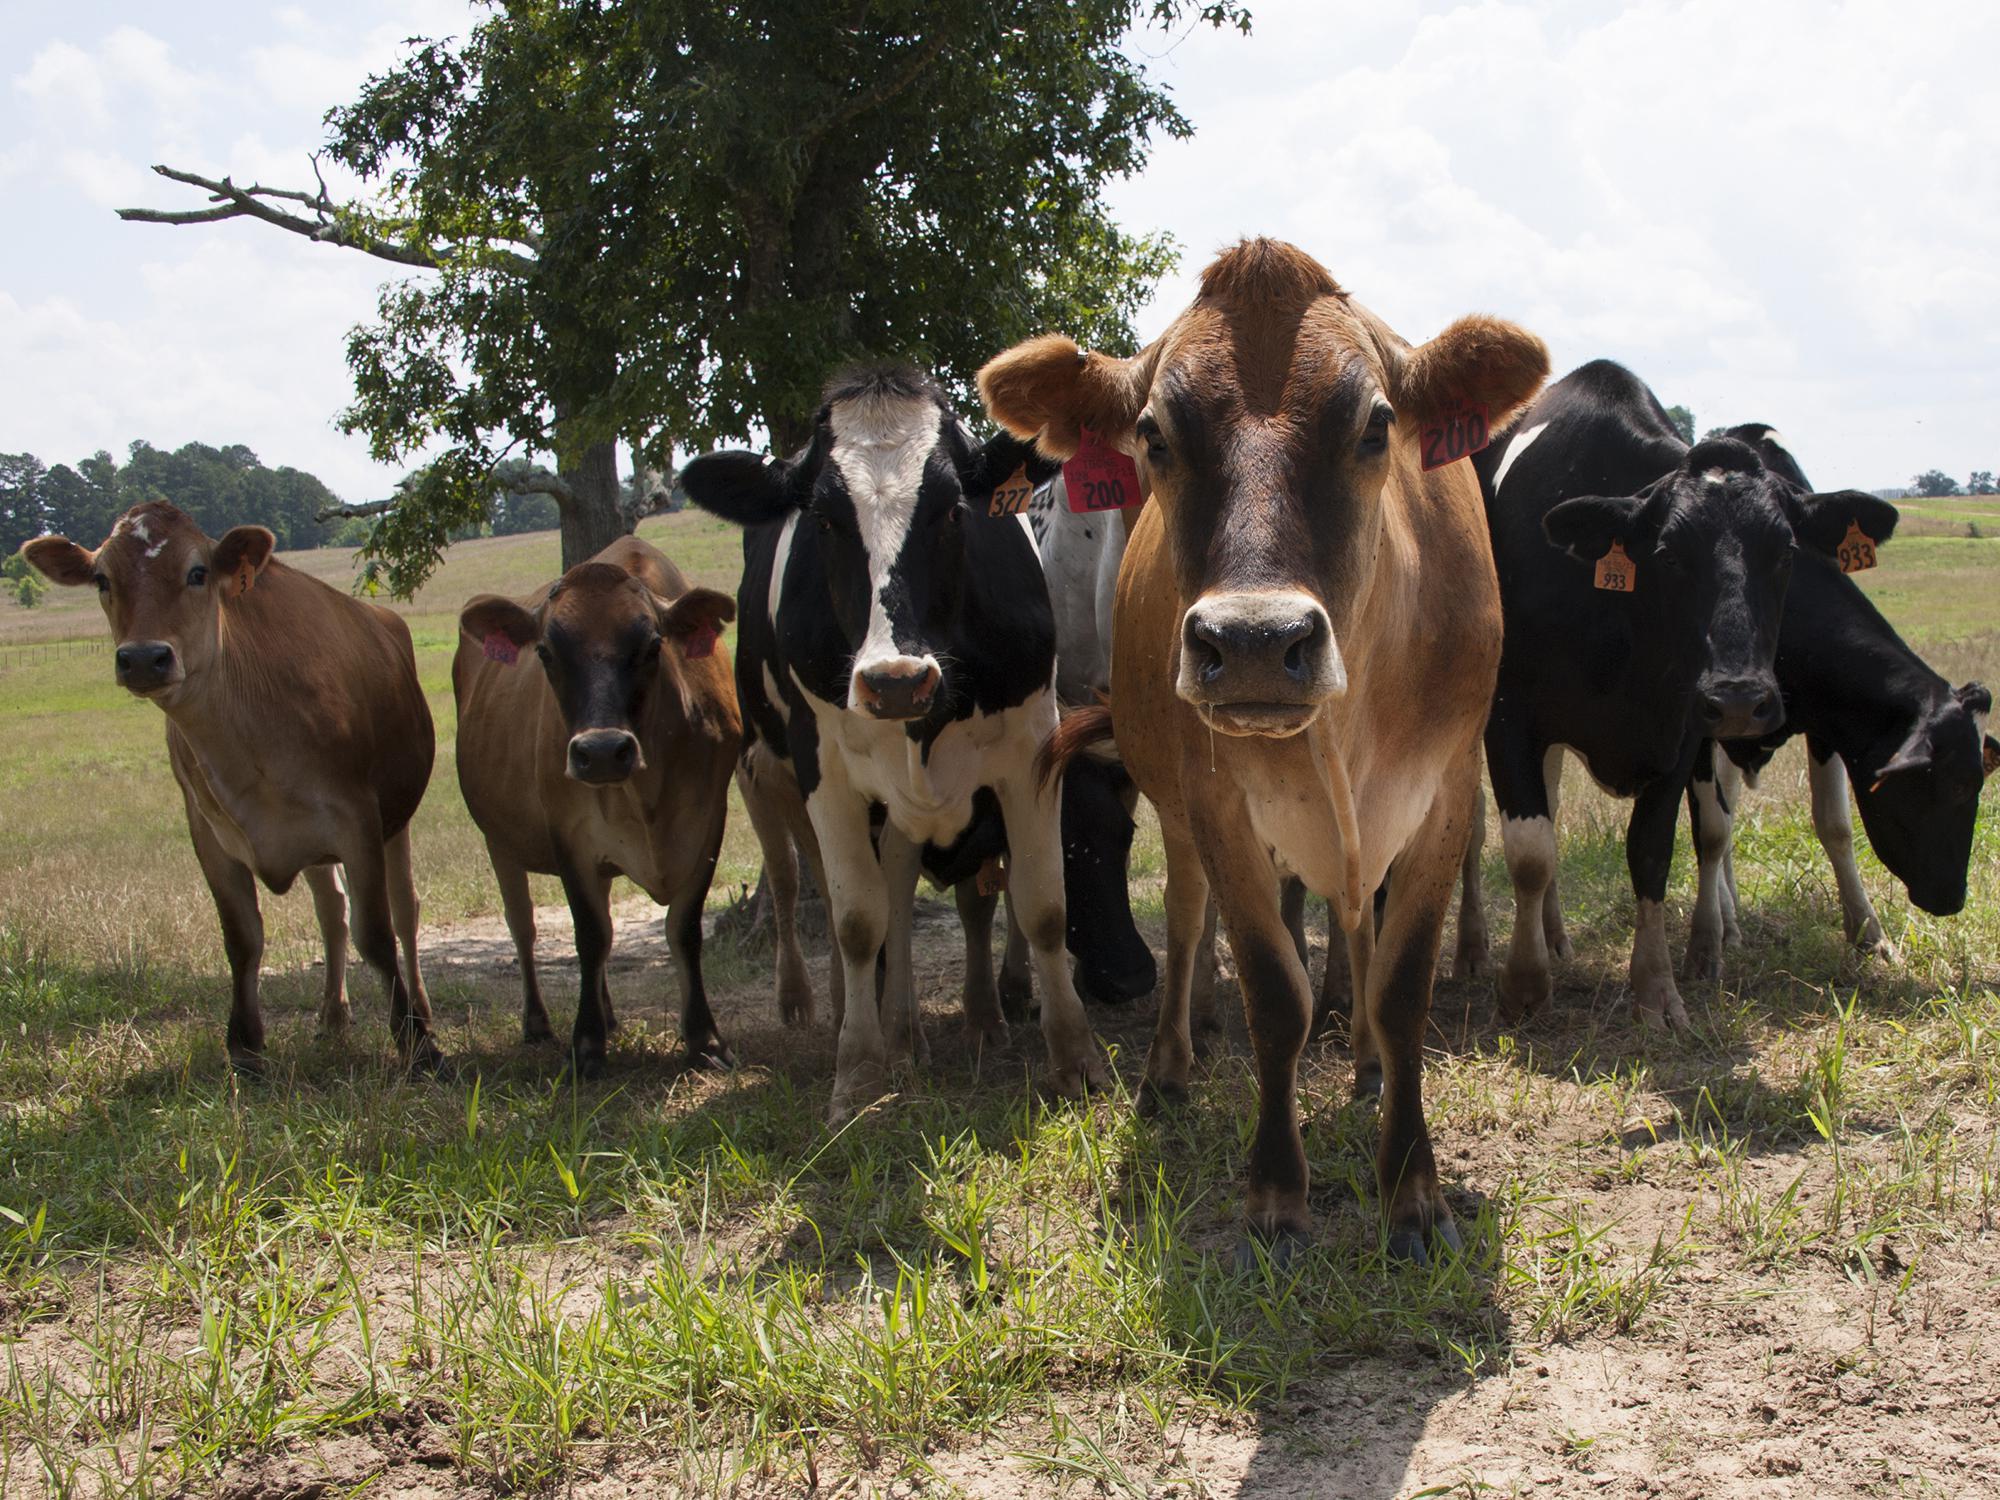 Dairy producers can visit the 2017 Mississippi State University Dairy Open House May 20 at the Bearden Dairy Research Center near Starkville to see how MSU researchers handle their herd. (Photo by MSU Extension Service/Kat Lawrence)